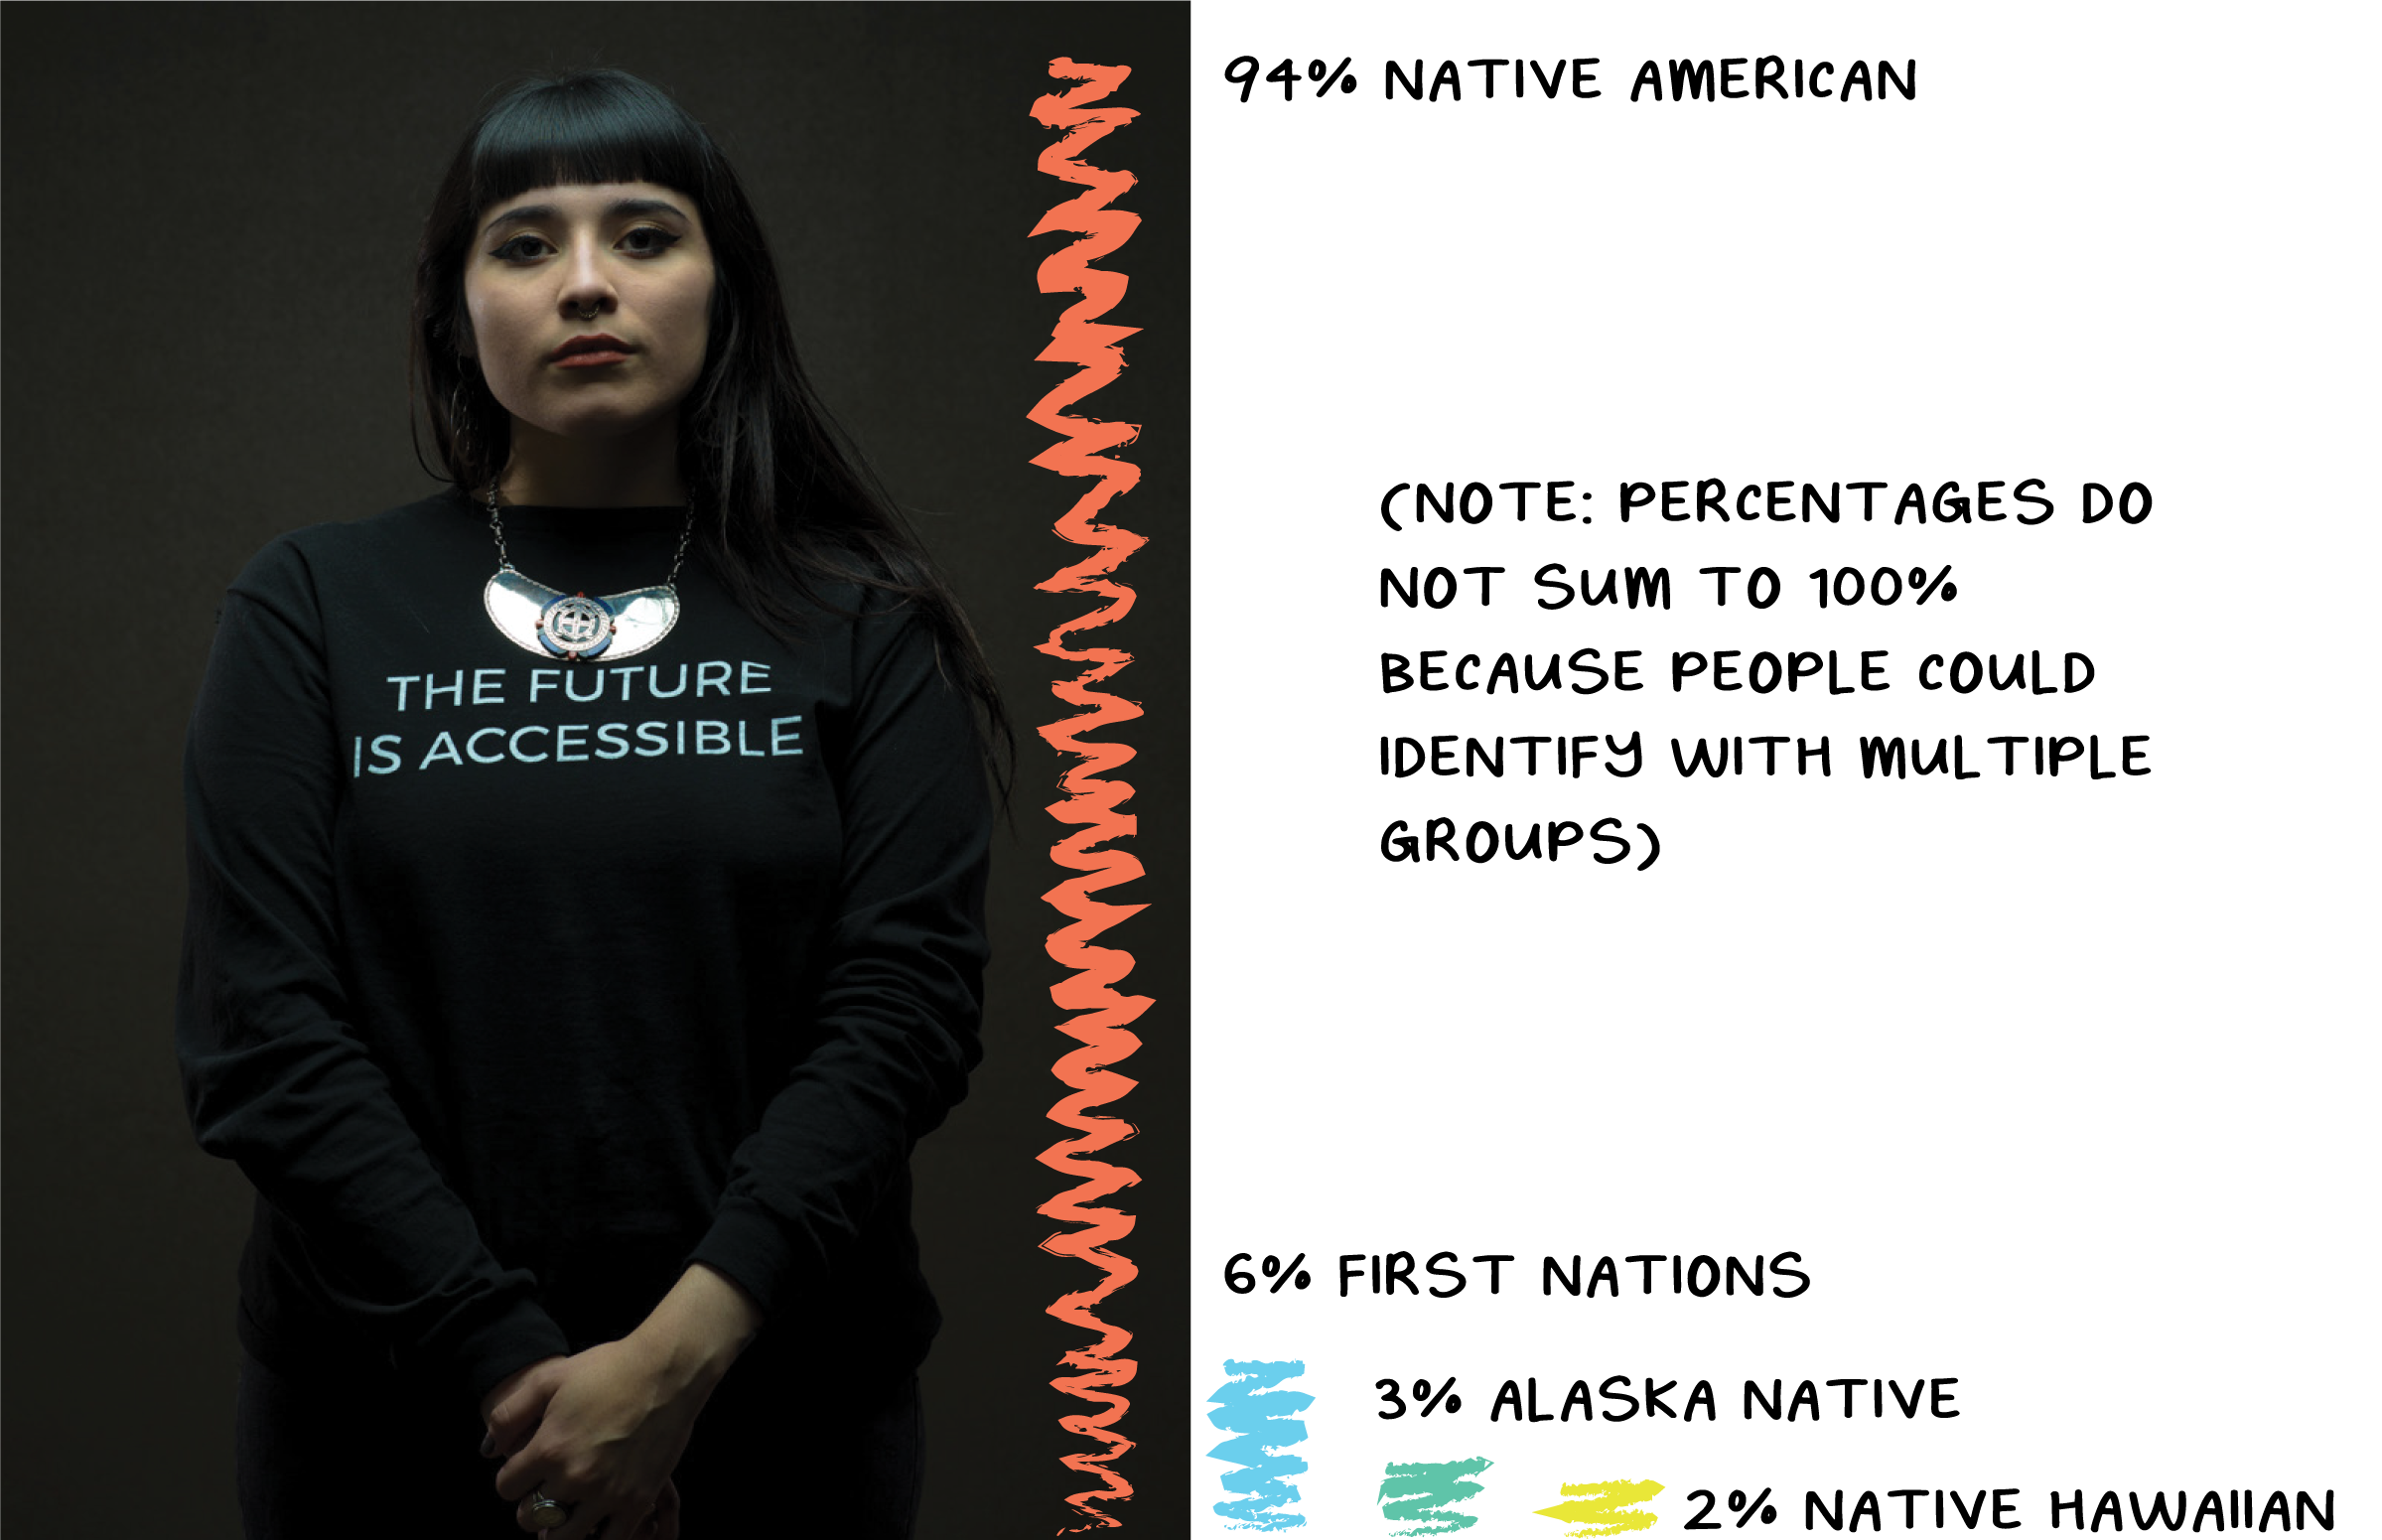 A Native woman with a black shirt that says "The Future is Accessible". There is a bar chart breaking down identity of Native Americans who took the survey including 94% Native American, 6% First Nations, 3% Alaska Native, and 2% Native Hawaiian